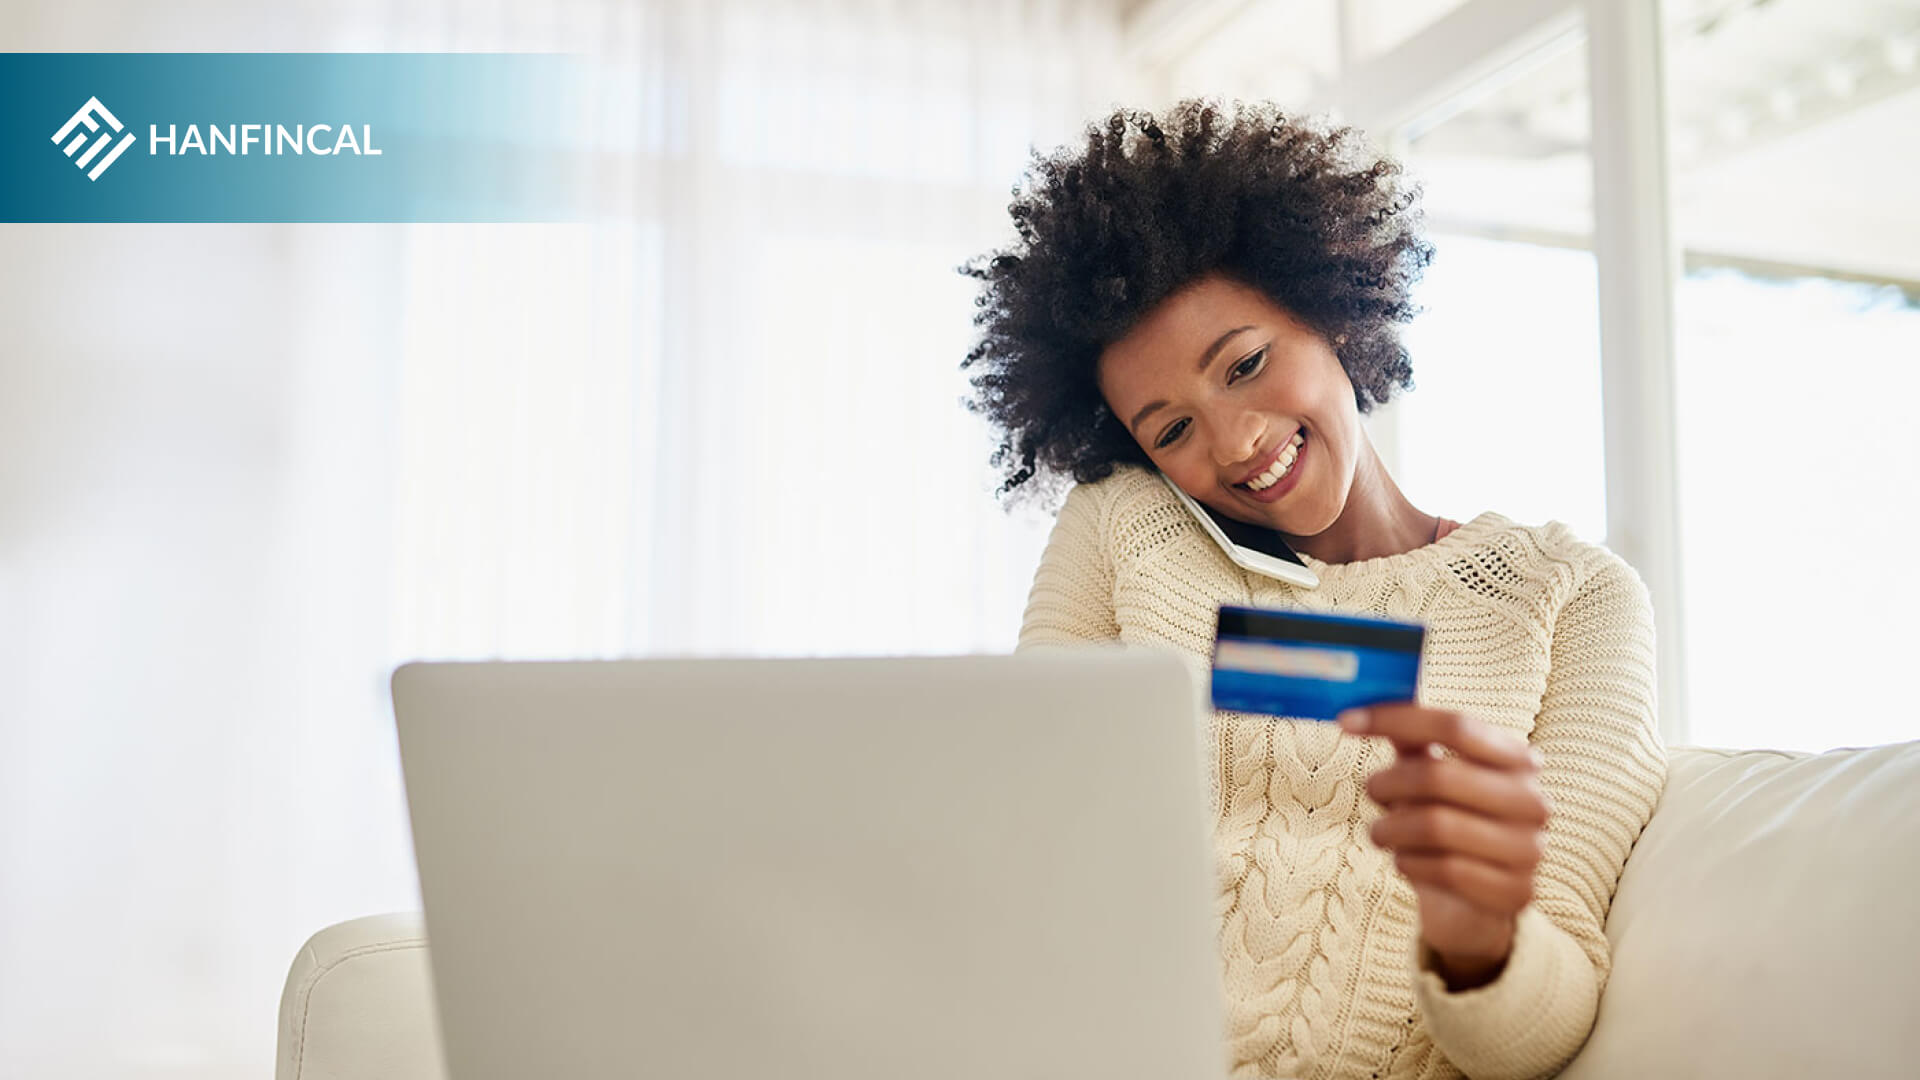 How long does a credit card refund take?